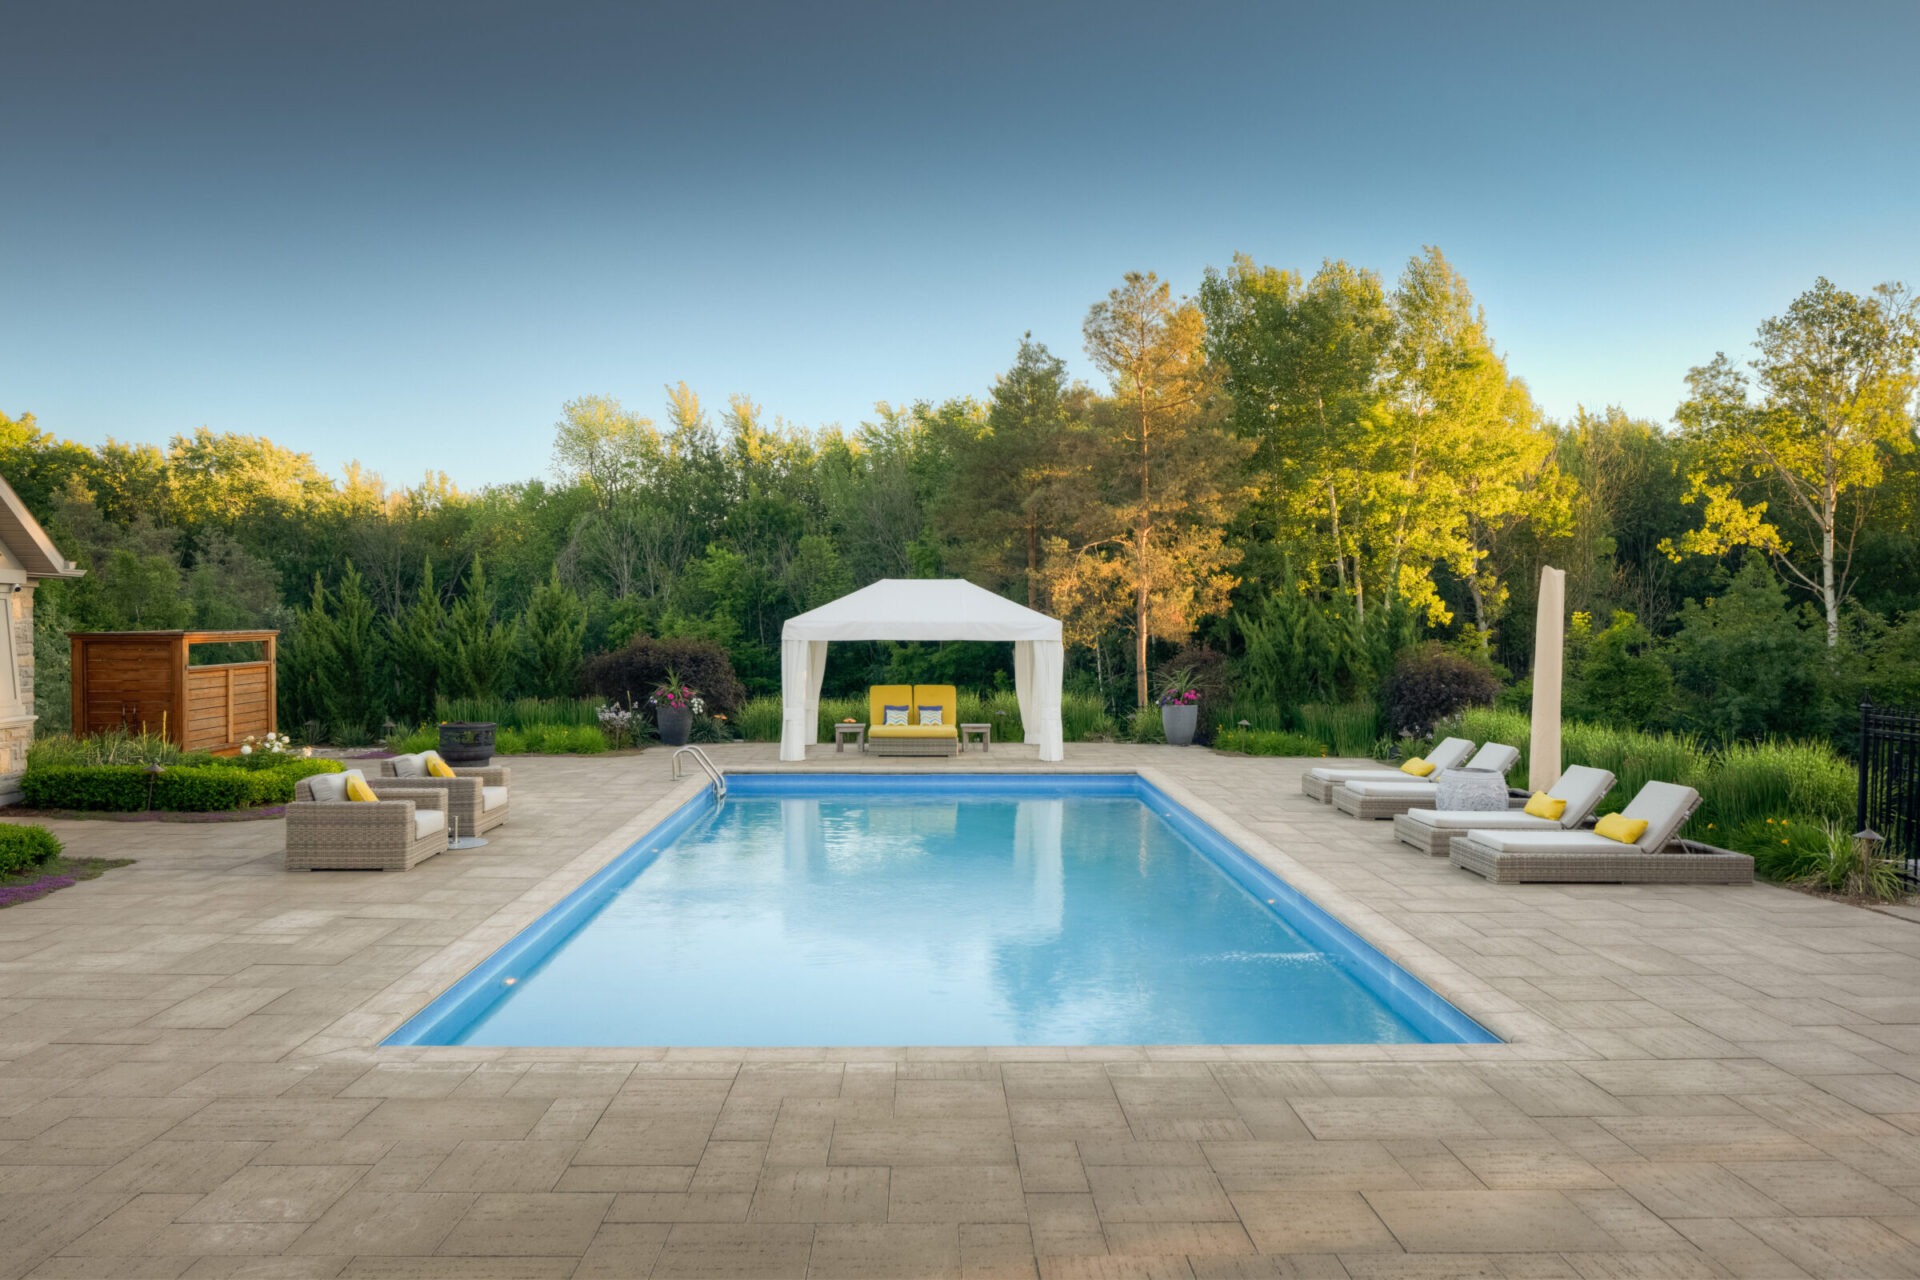 An outdoor residential pool with loungers, a white canopy, surrounded by landscaped garden and trees against a clear blue sky during daytime.